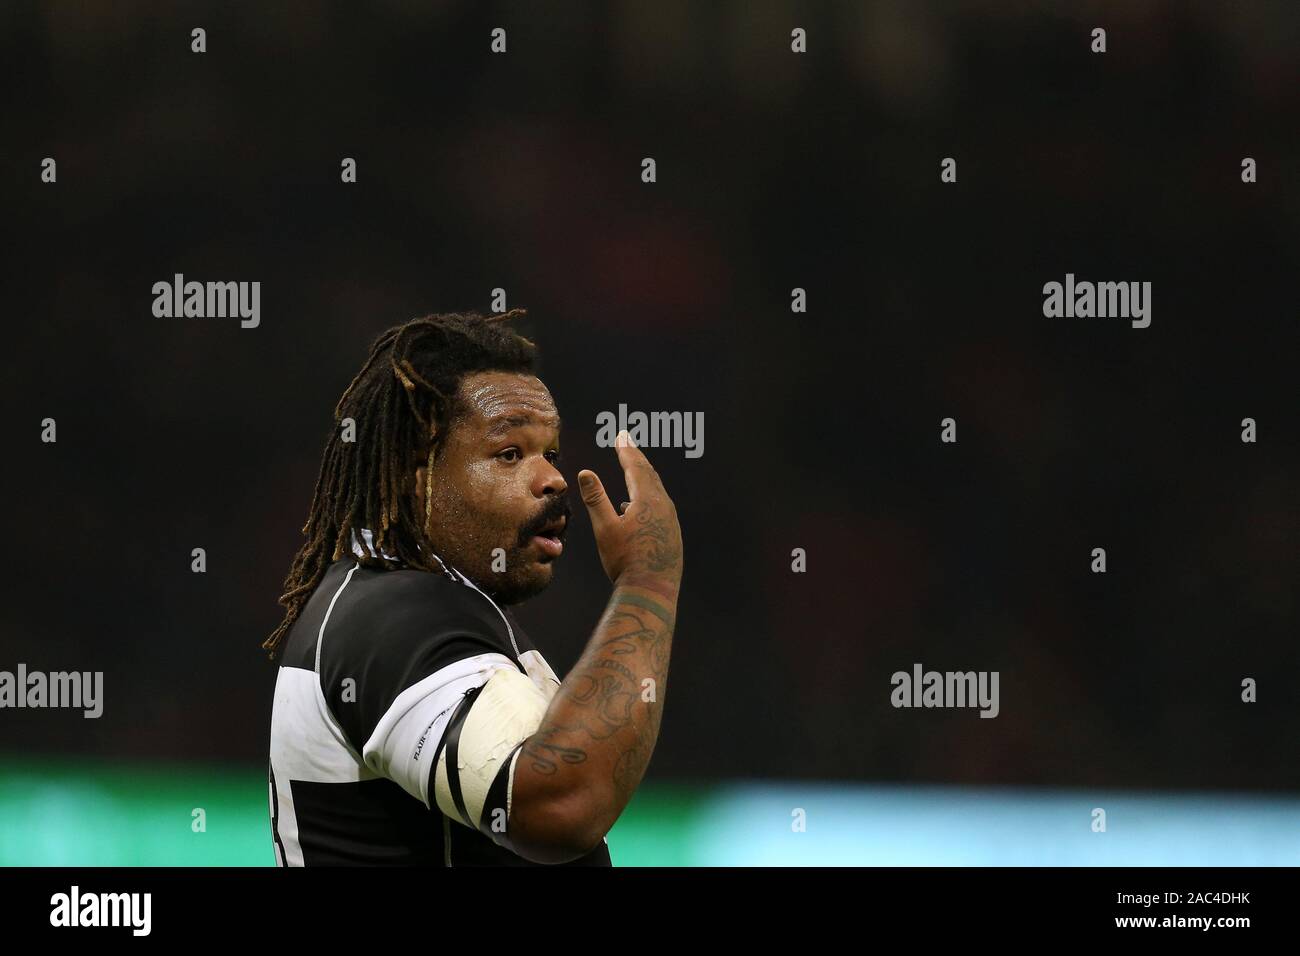 Cardiff, UK. 30th Nov, 2019. Mathieu Bastareaud of the Barbarians looks on.Wales v Barbarians rugby at the Principality Stadium in Cardiff, Wales, UK on Saturday 30th November 2019. pic by Andrew Orchard/Alamy Live News PLEASE NOTE PICTURE AVAILABLE FOR EDITORIAL USE ONLY Stock Photo